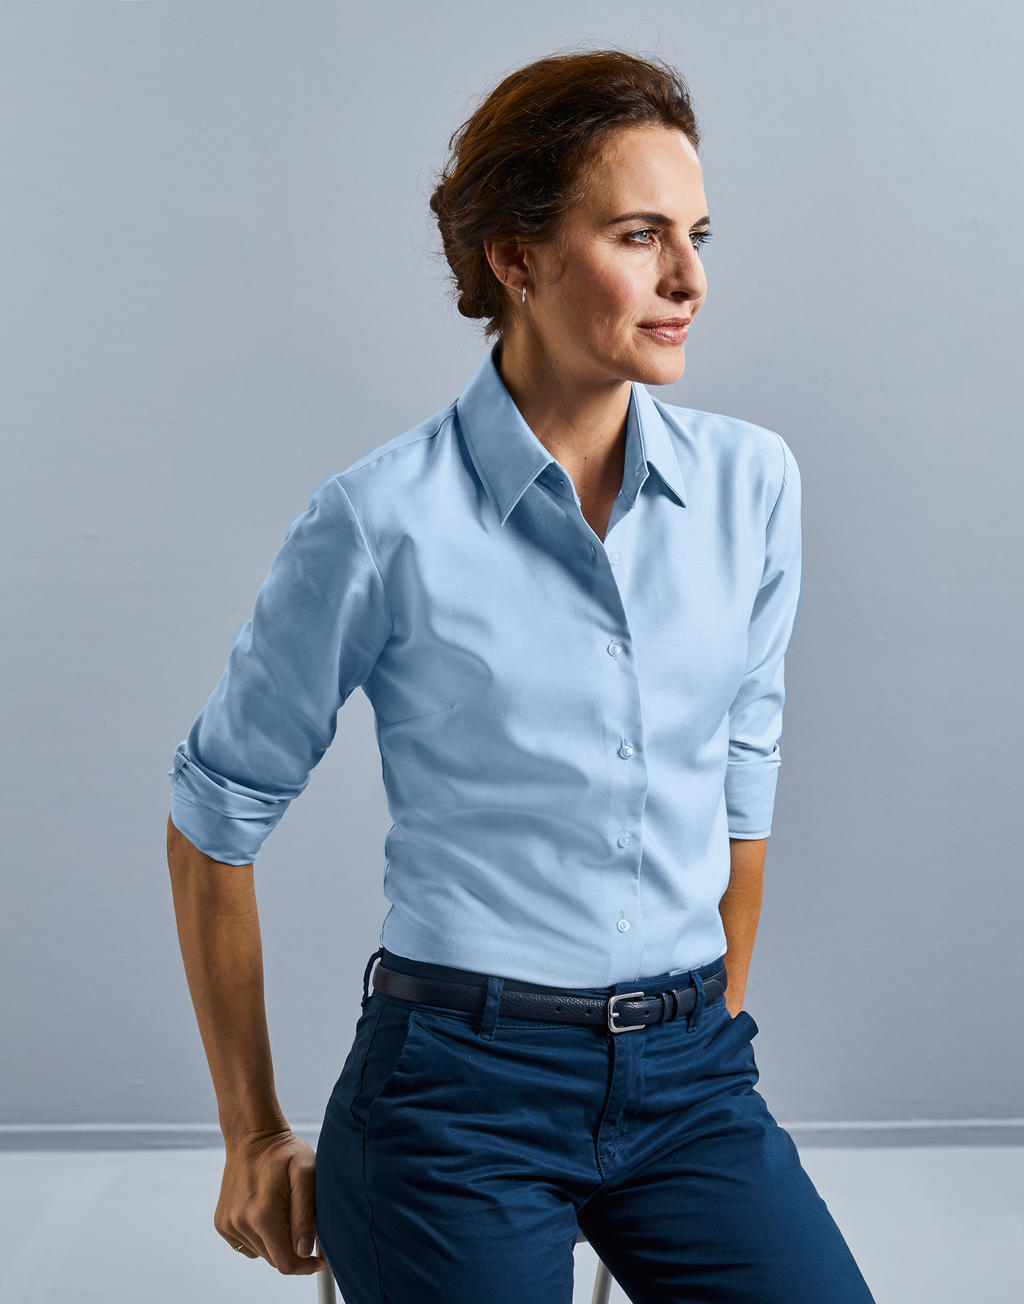  Ladies Classic Oxford Shirt LS in Farbe White